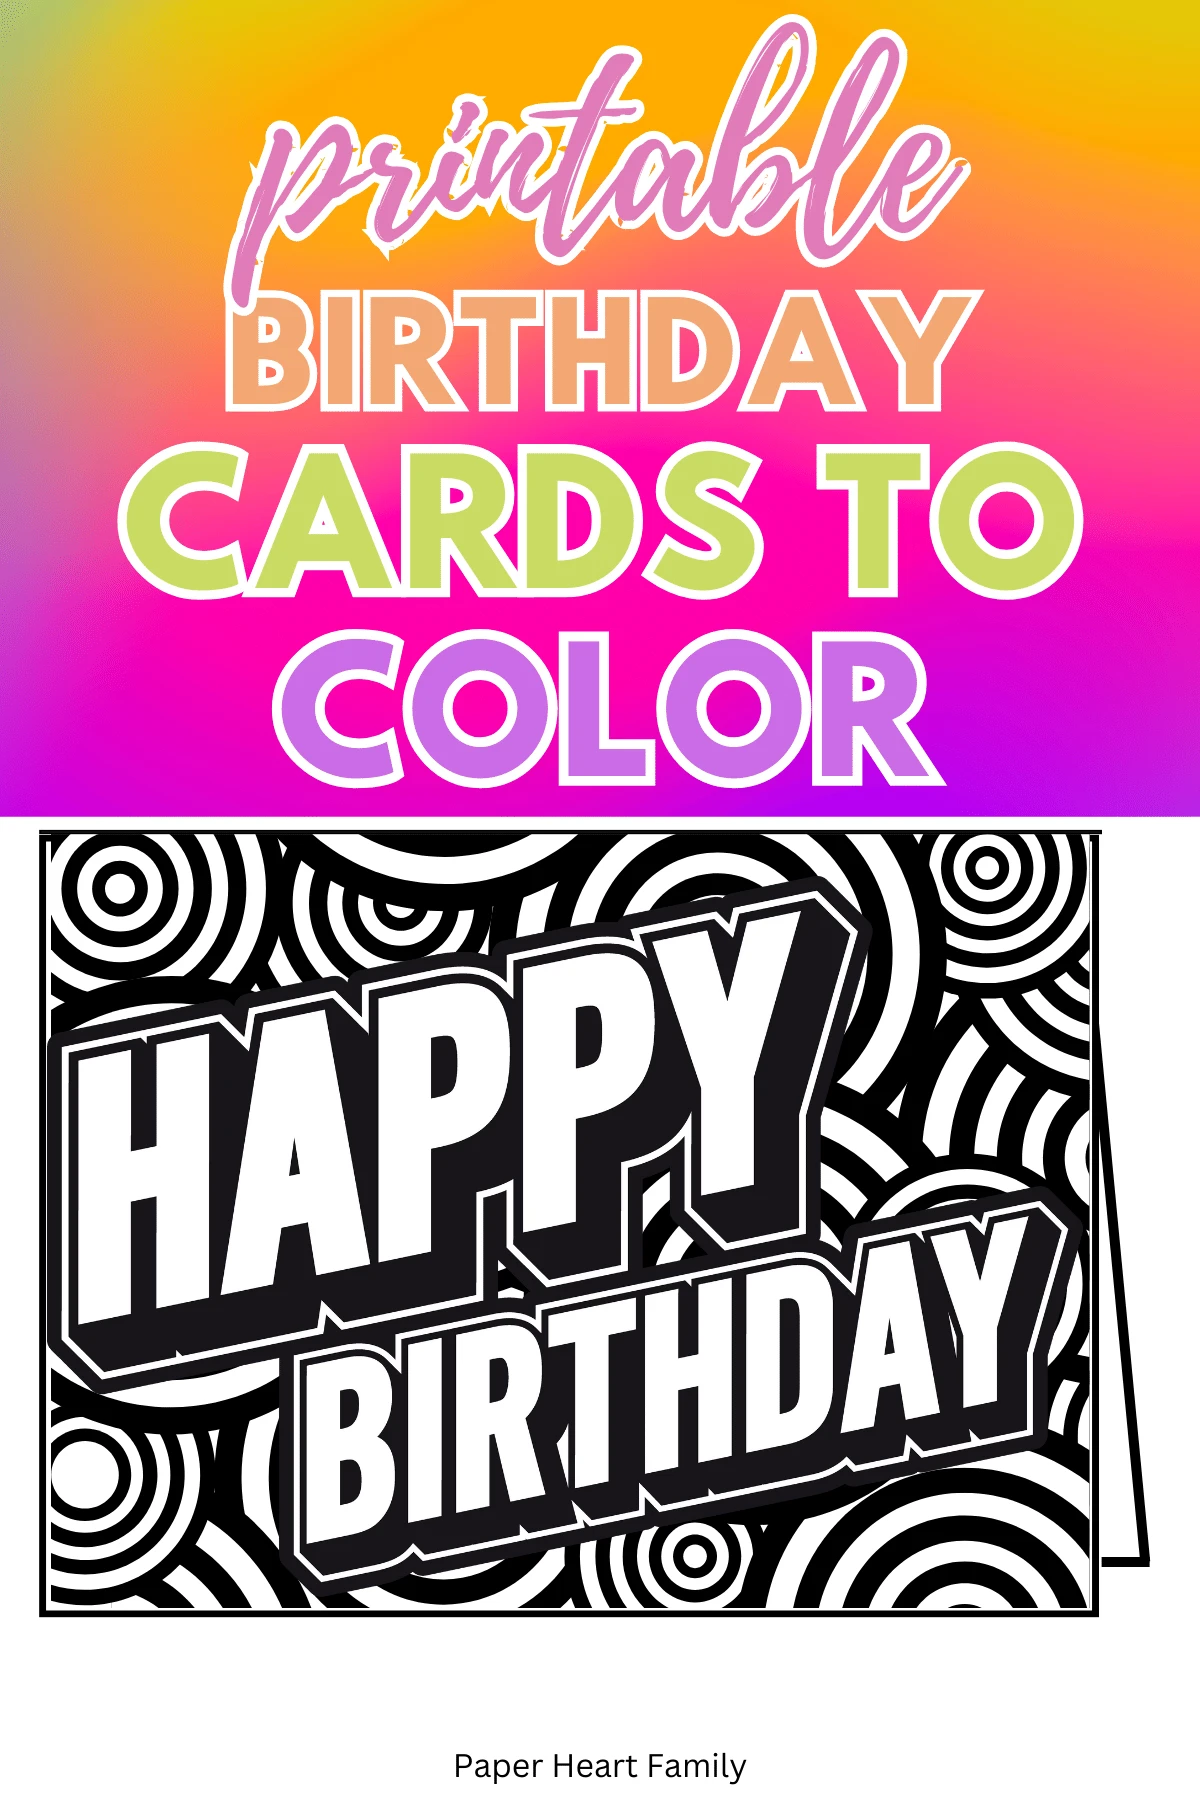 70's themed birthday card to color